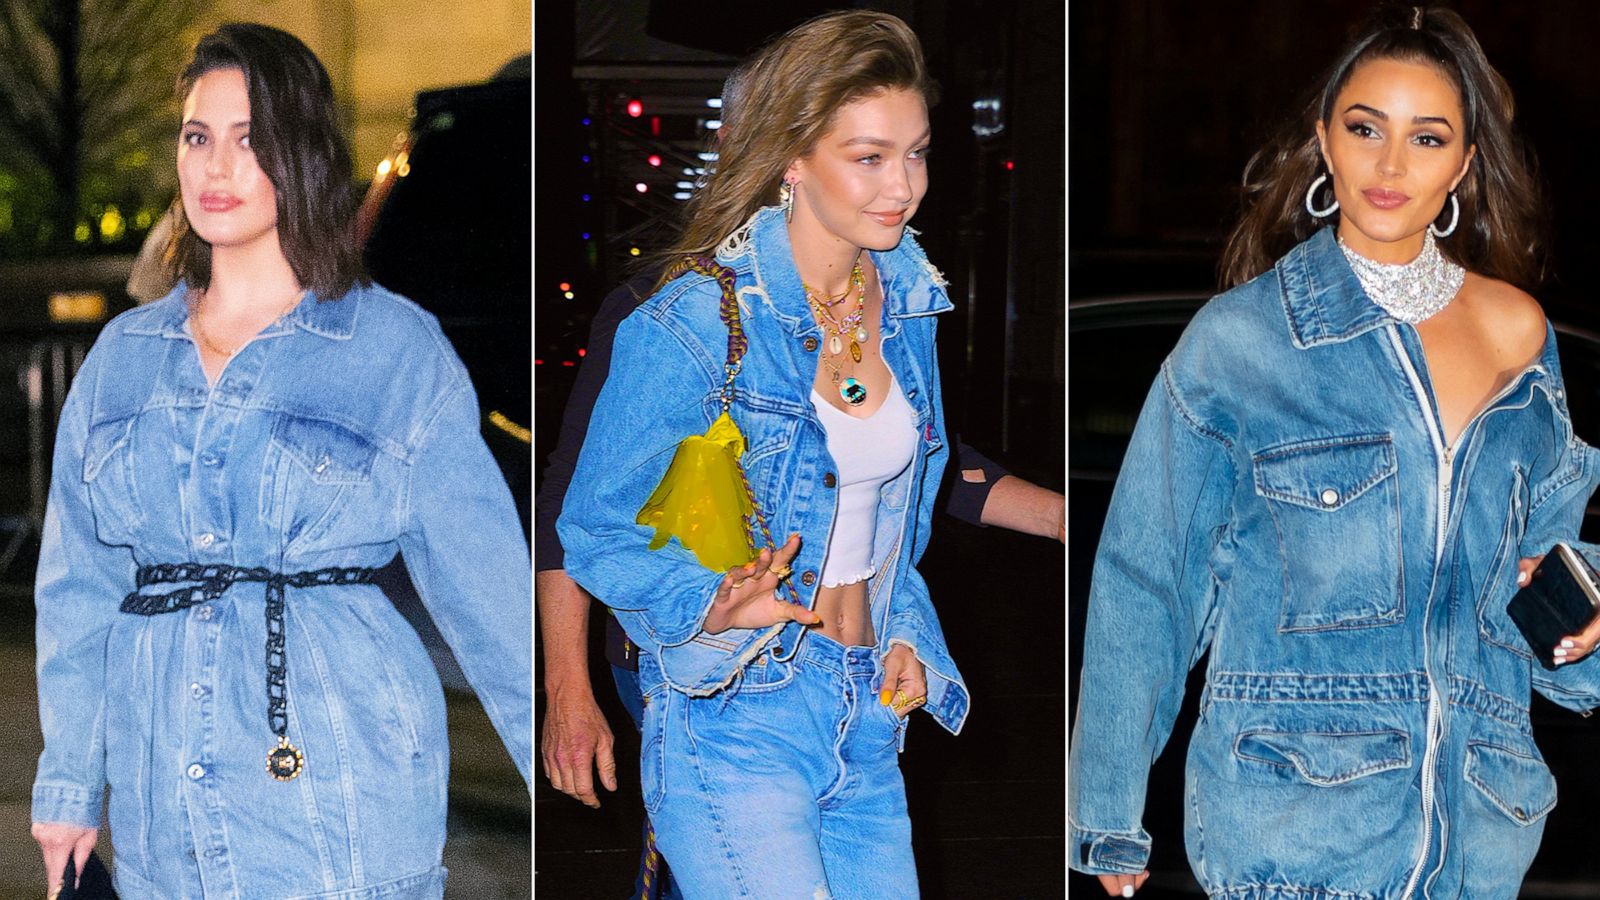 From her “Denim & Diamonds” birthday party this wknd : r